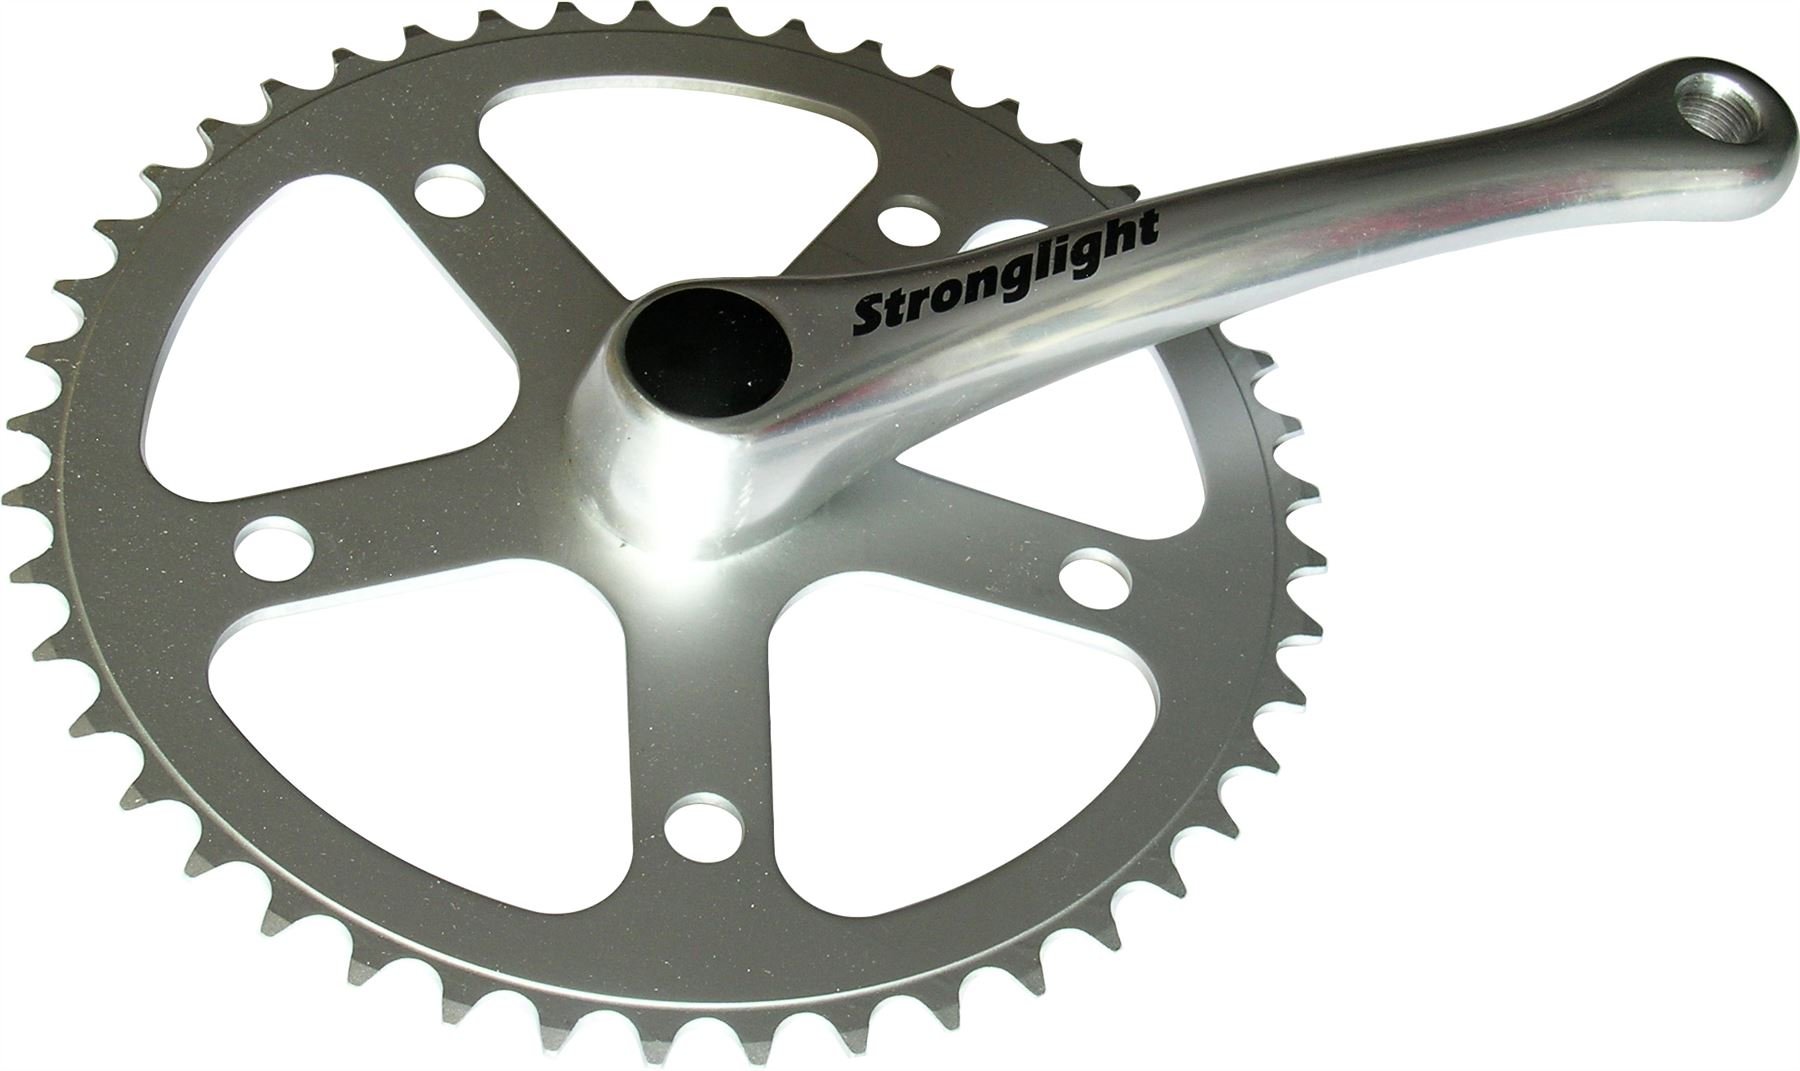 55S246 Stronglight 46T X 3/32" 55 Series Single Chainset